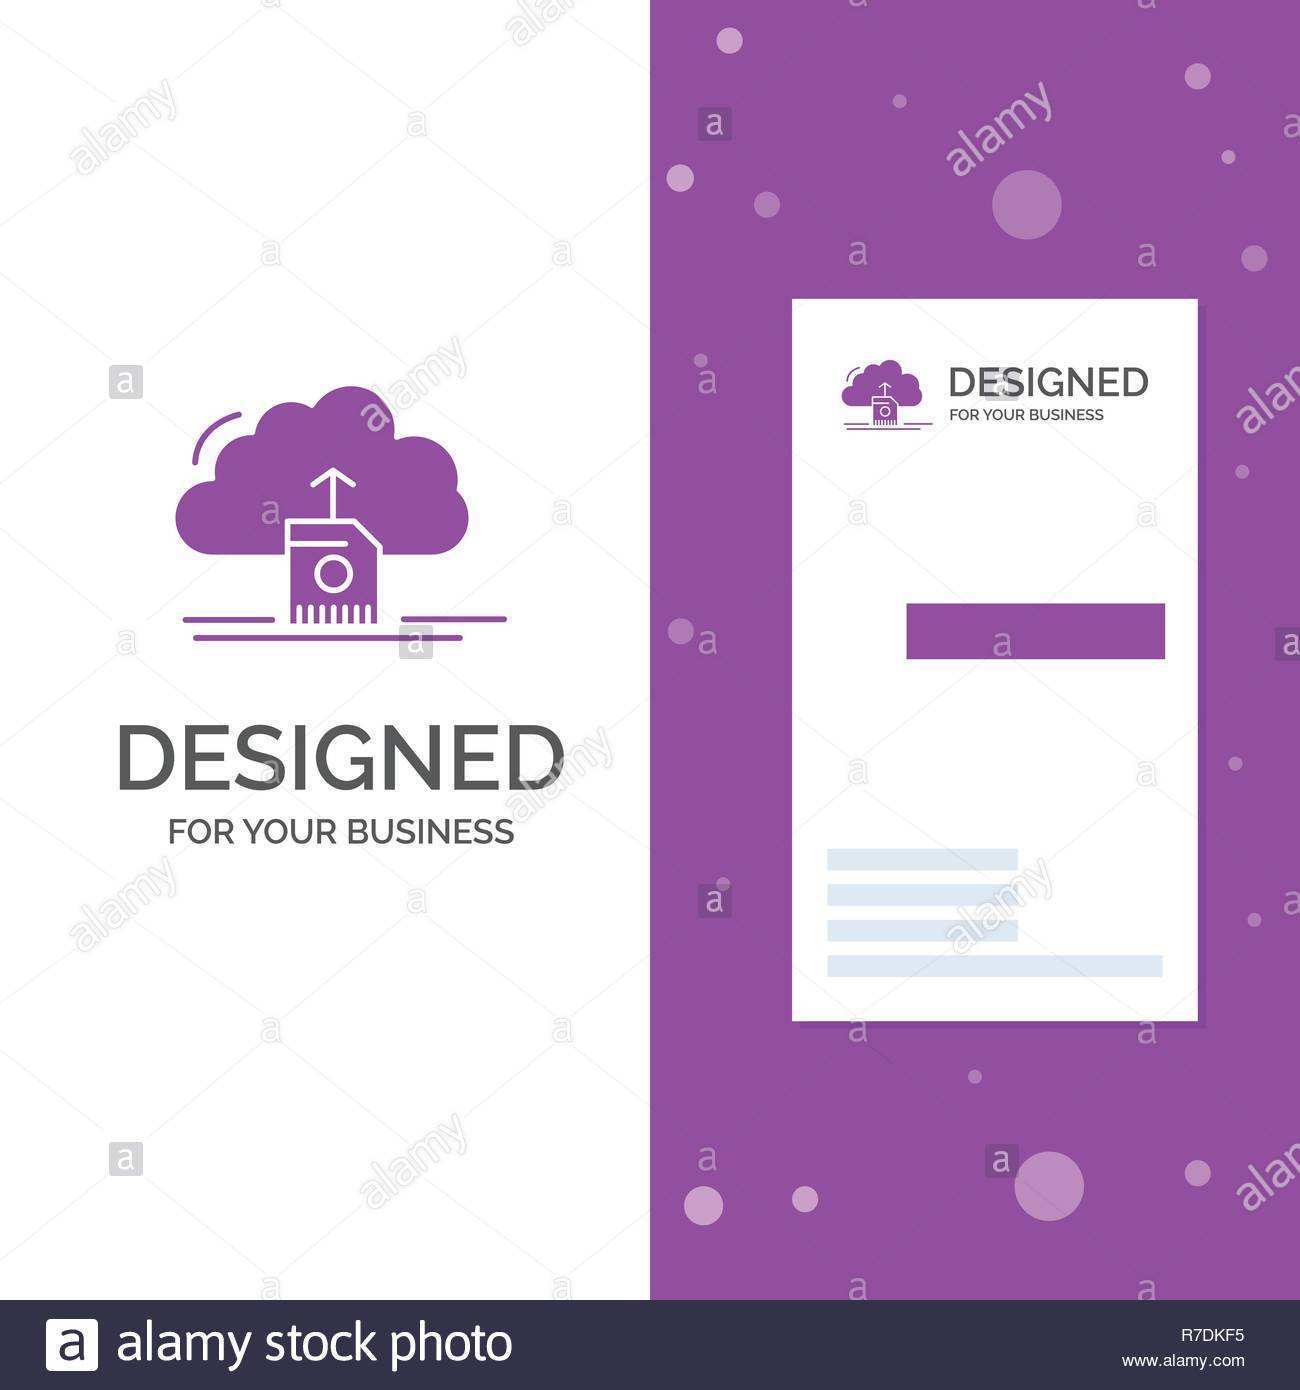 96 Blank Business Card Template Upload Logo Now for Business Card Template Upload Logo